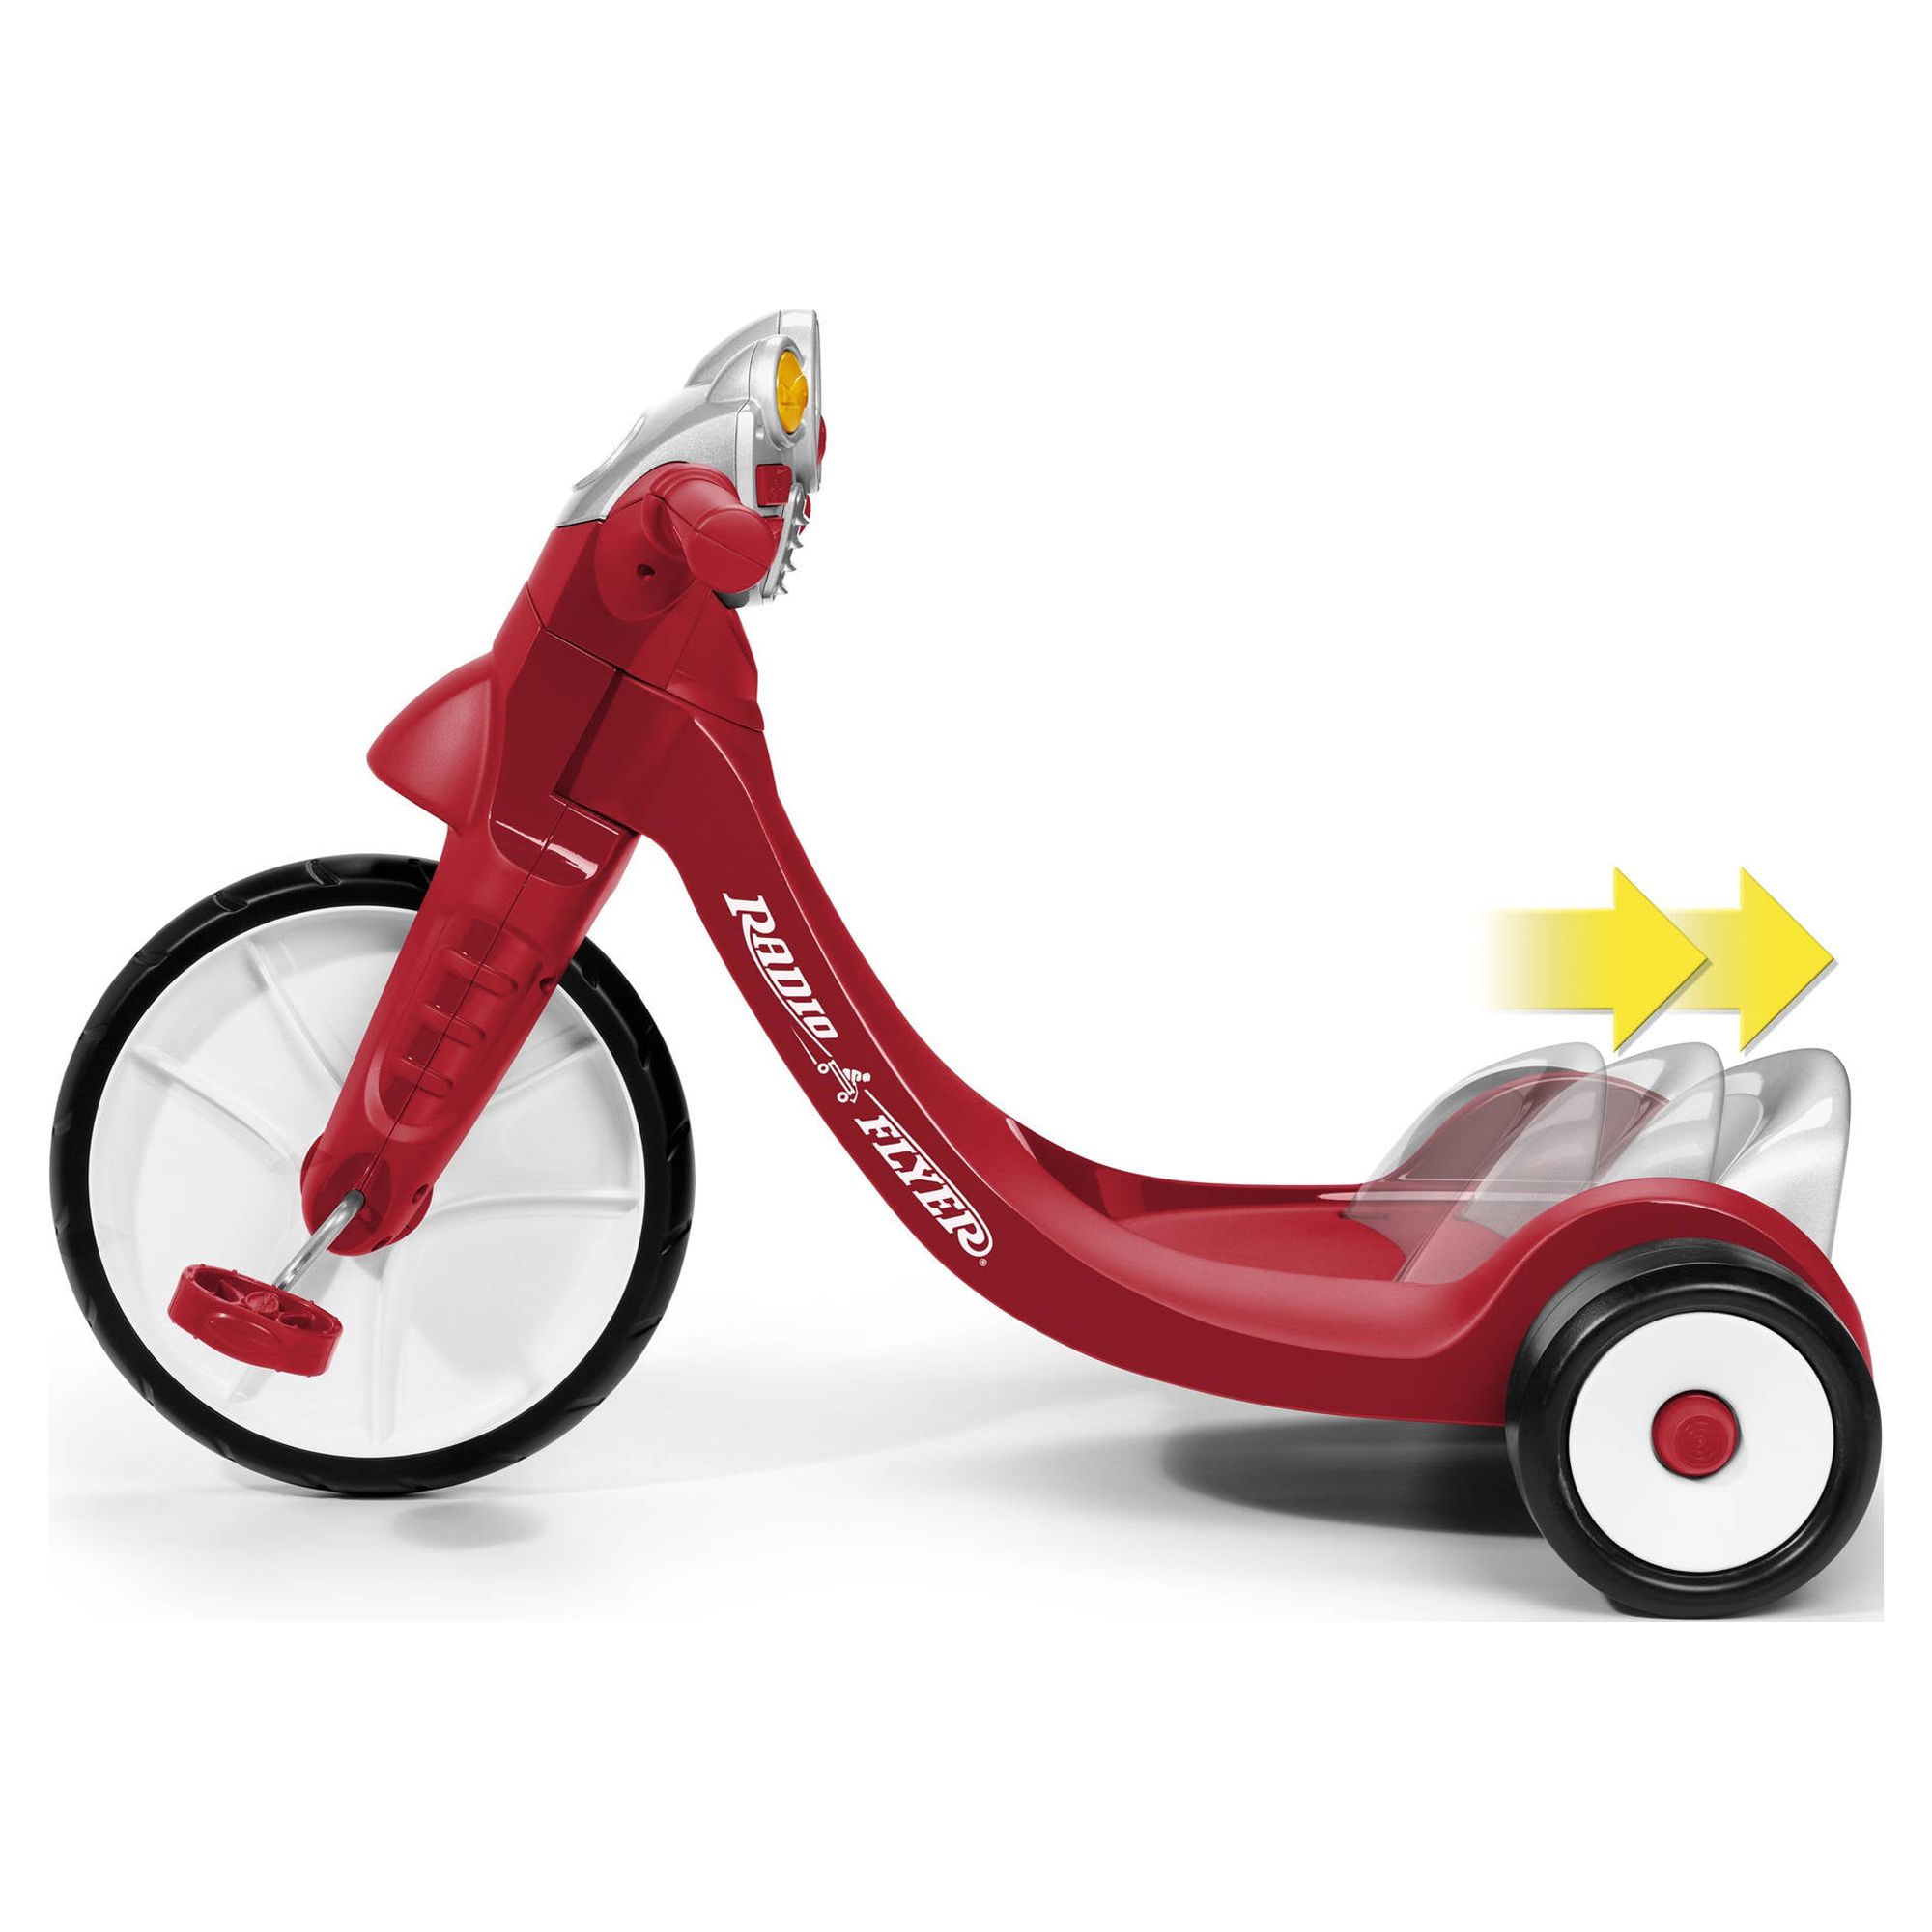 Radio Flyer, Lights & Sounds Racer, Red Tricycle for Girls and Boys - image 4 of 9